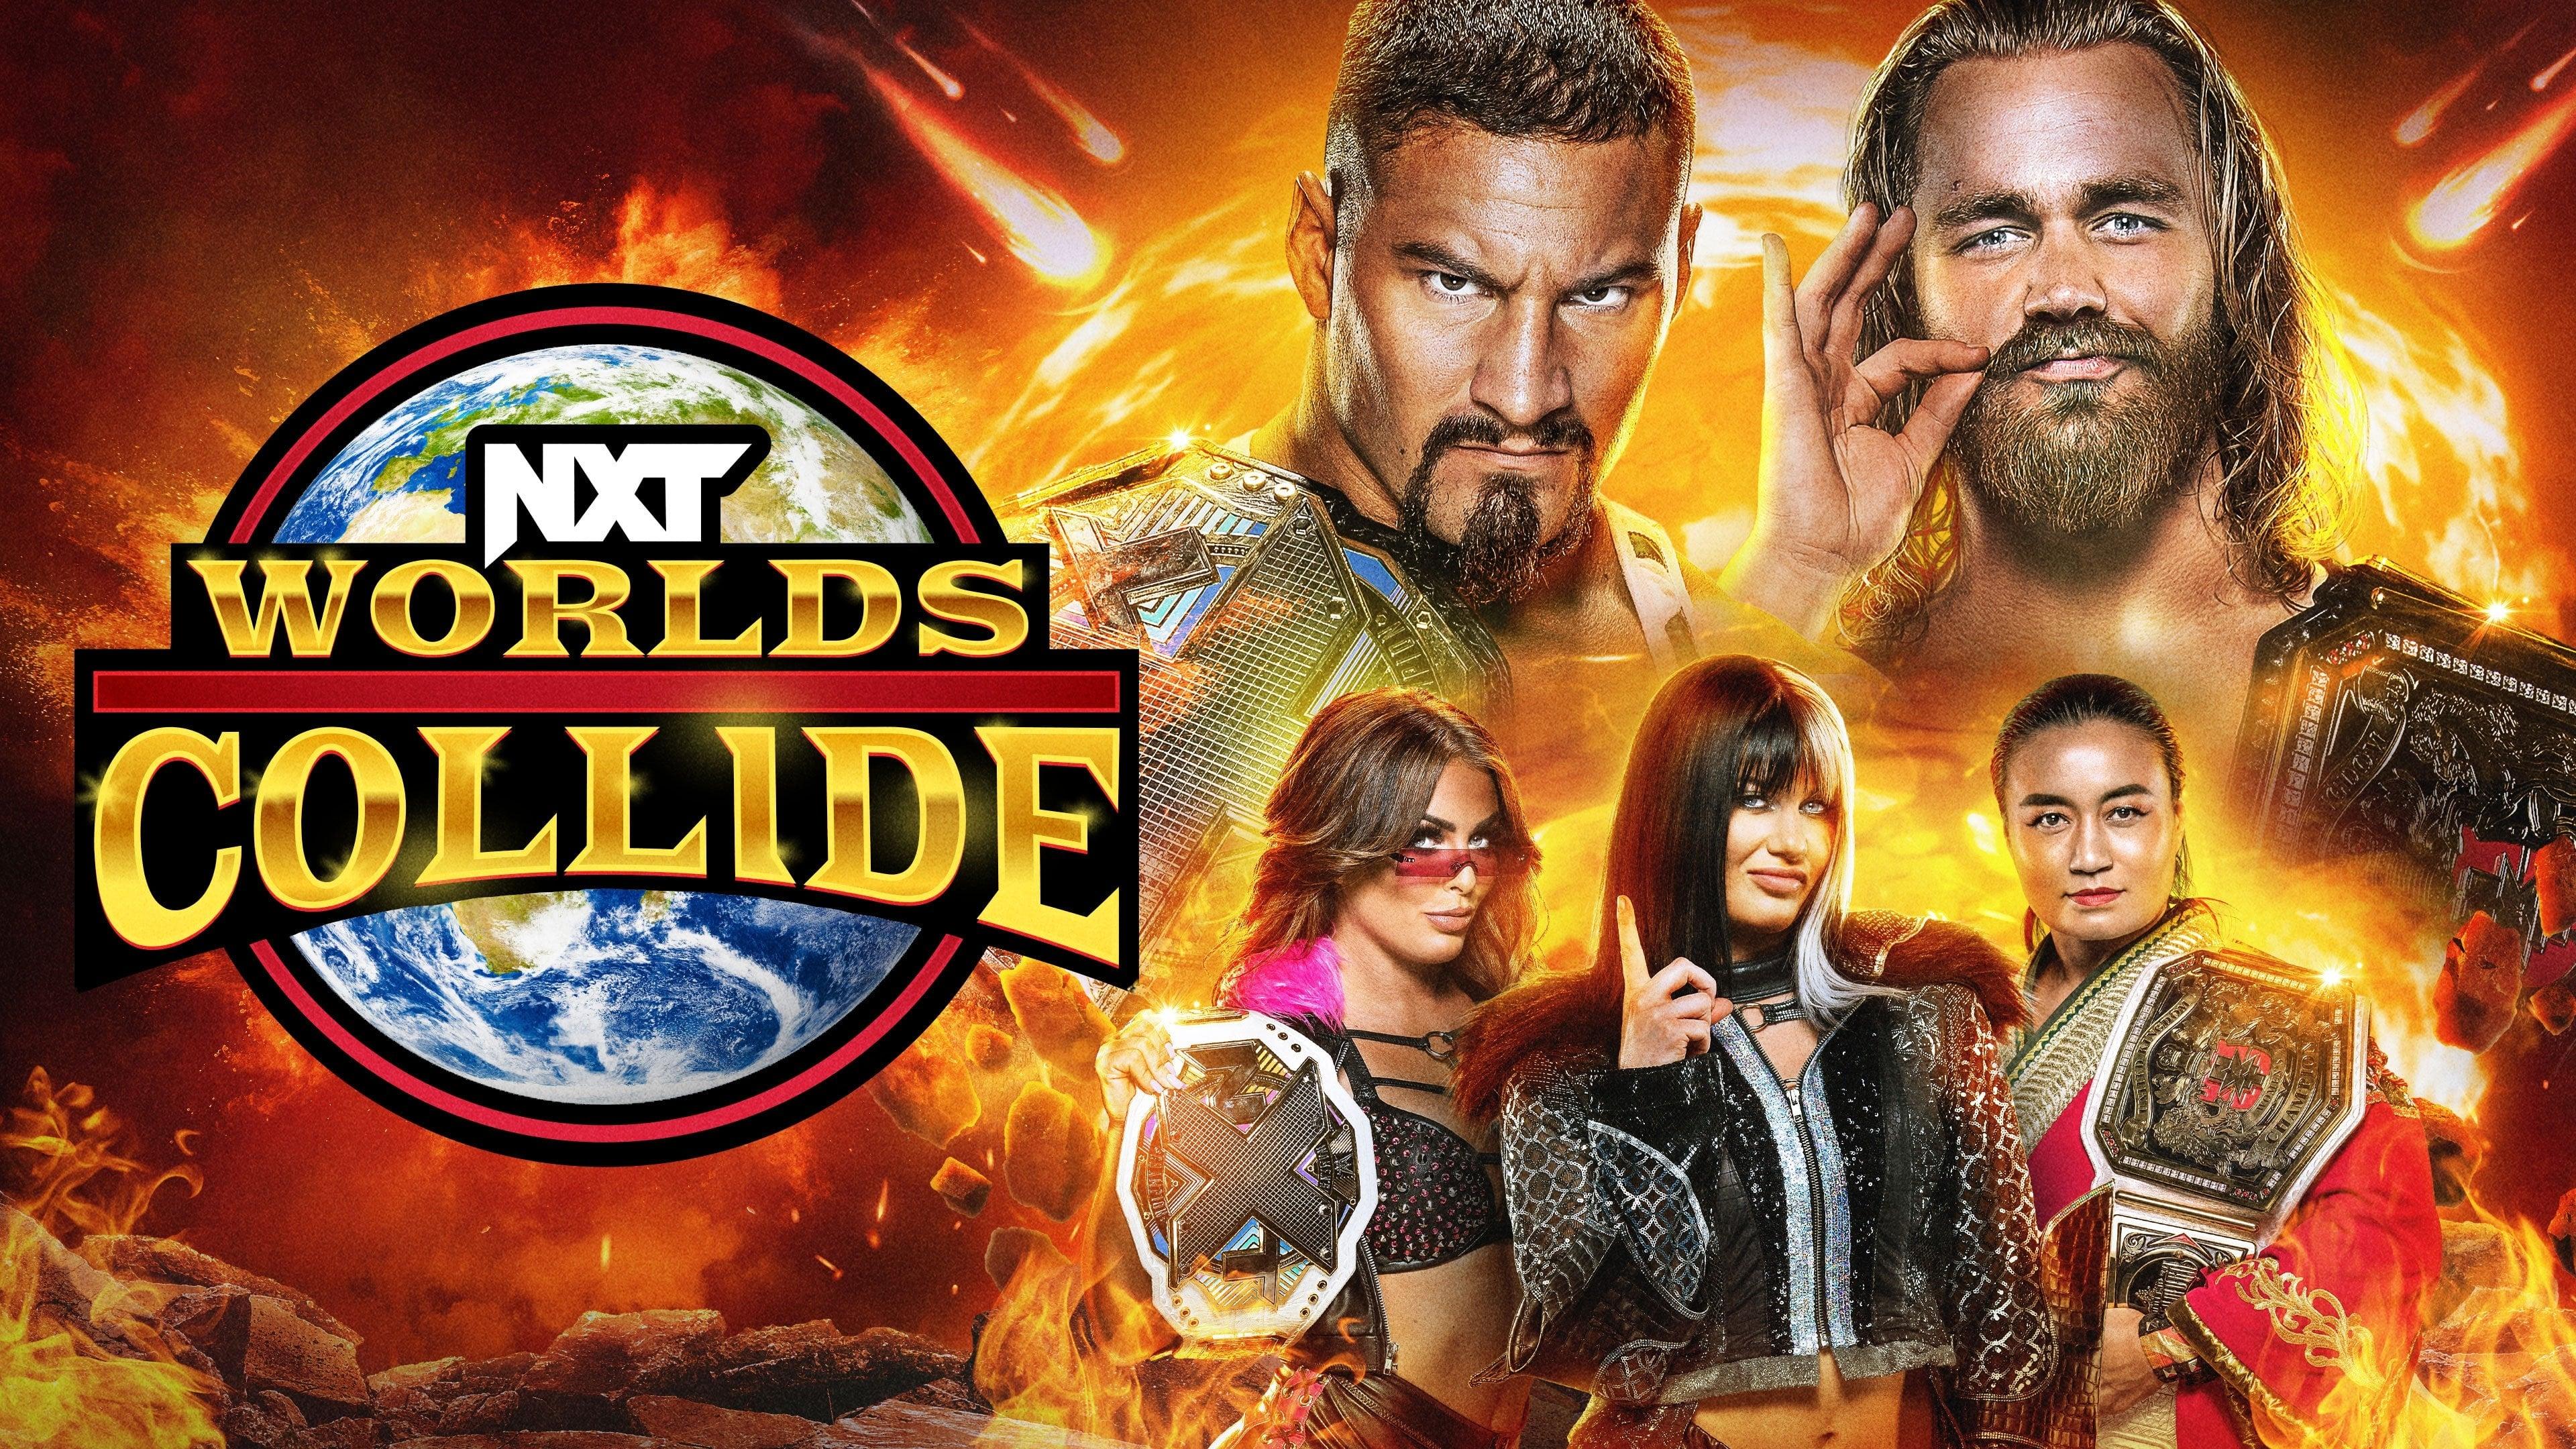 NXT Worlds Collide 2022 backdrop